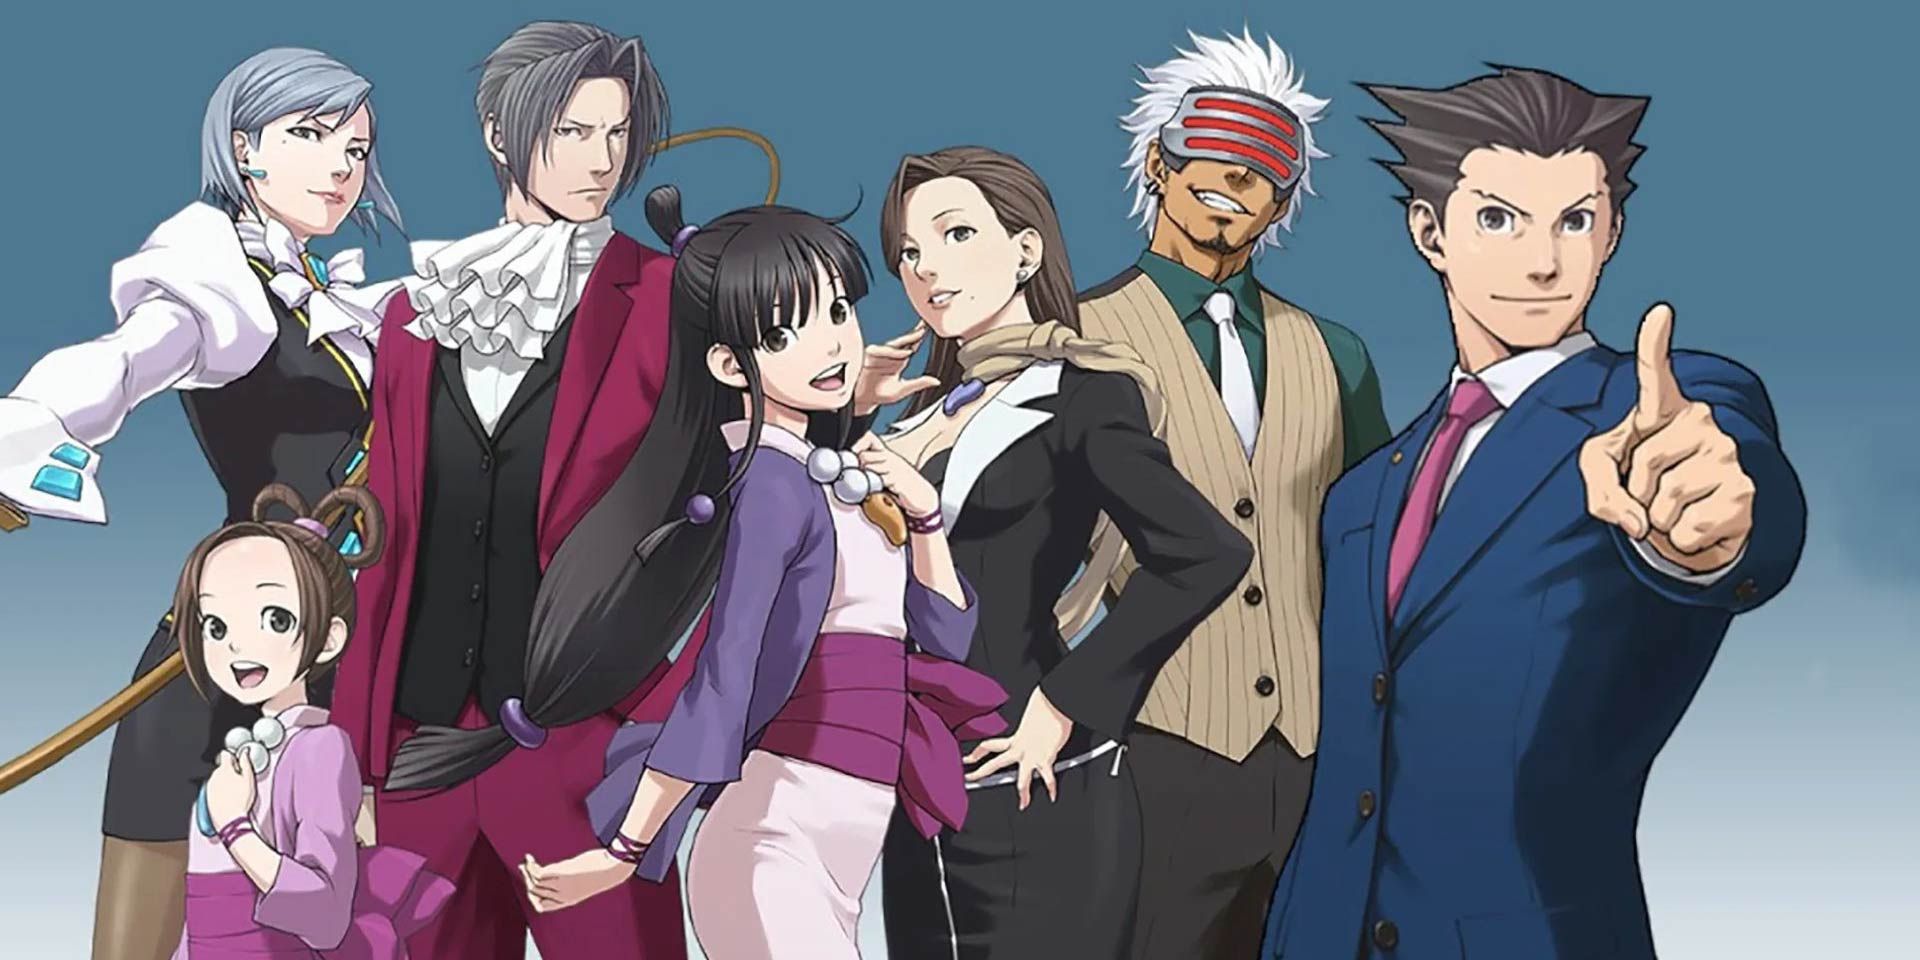 Iconic characters from the original Ace Attorney trilogy posing together.